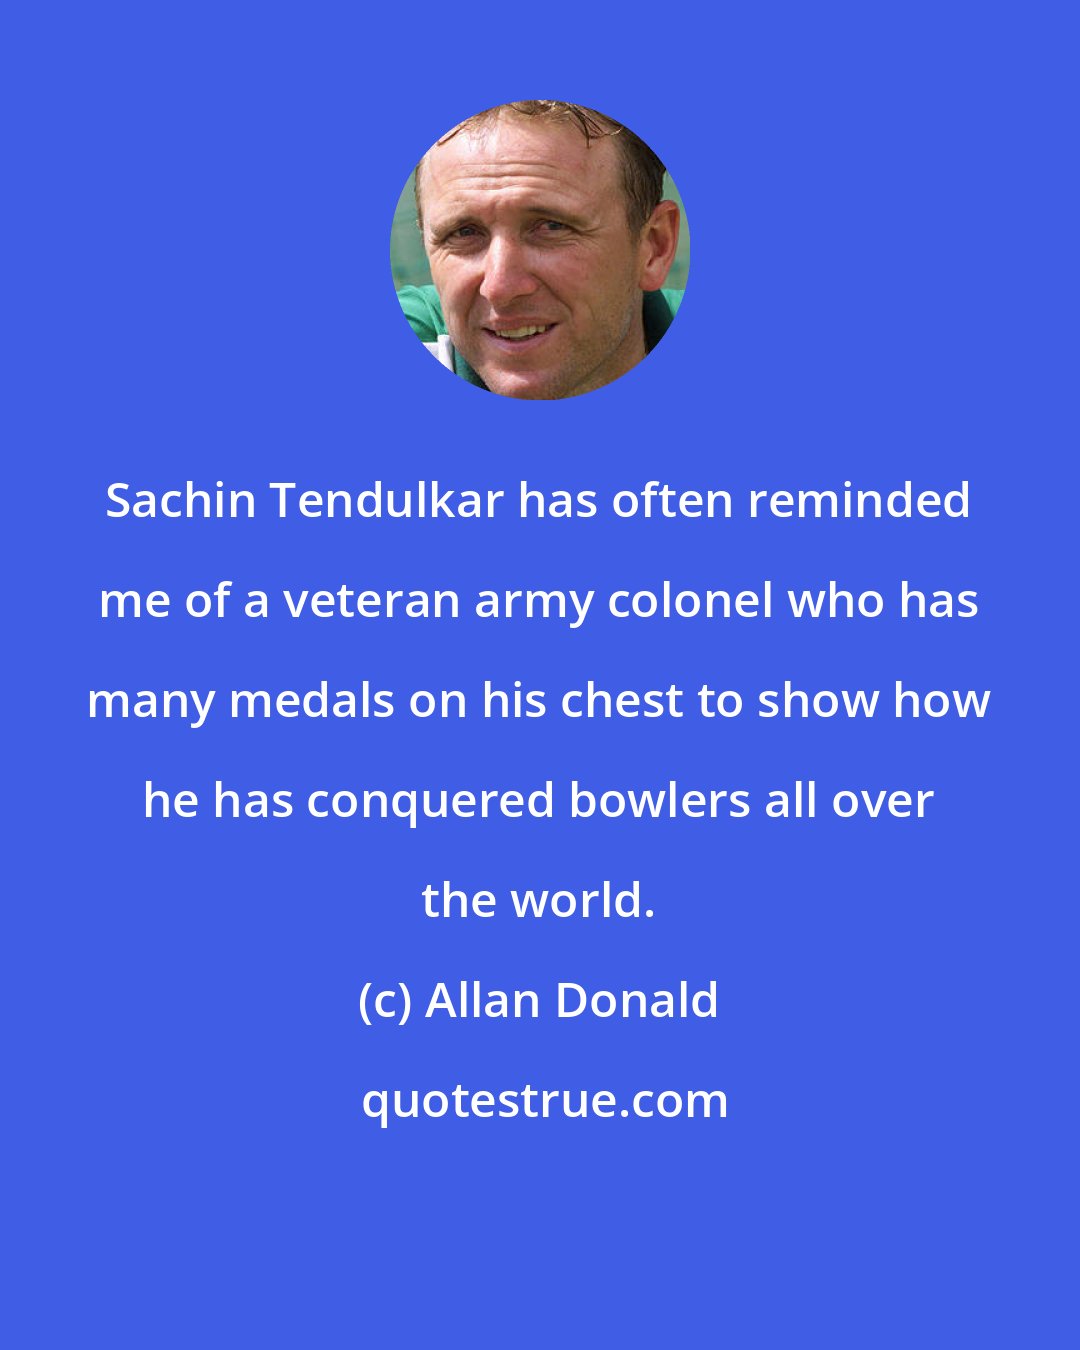 Allan Donald: Sachin Tendulkar has often reminded me of a veteran army colonel who has many medals on his chest to show how he has conquered bowlers all over the world.